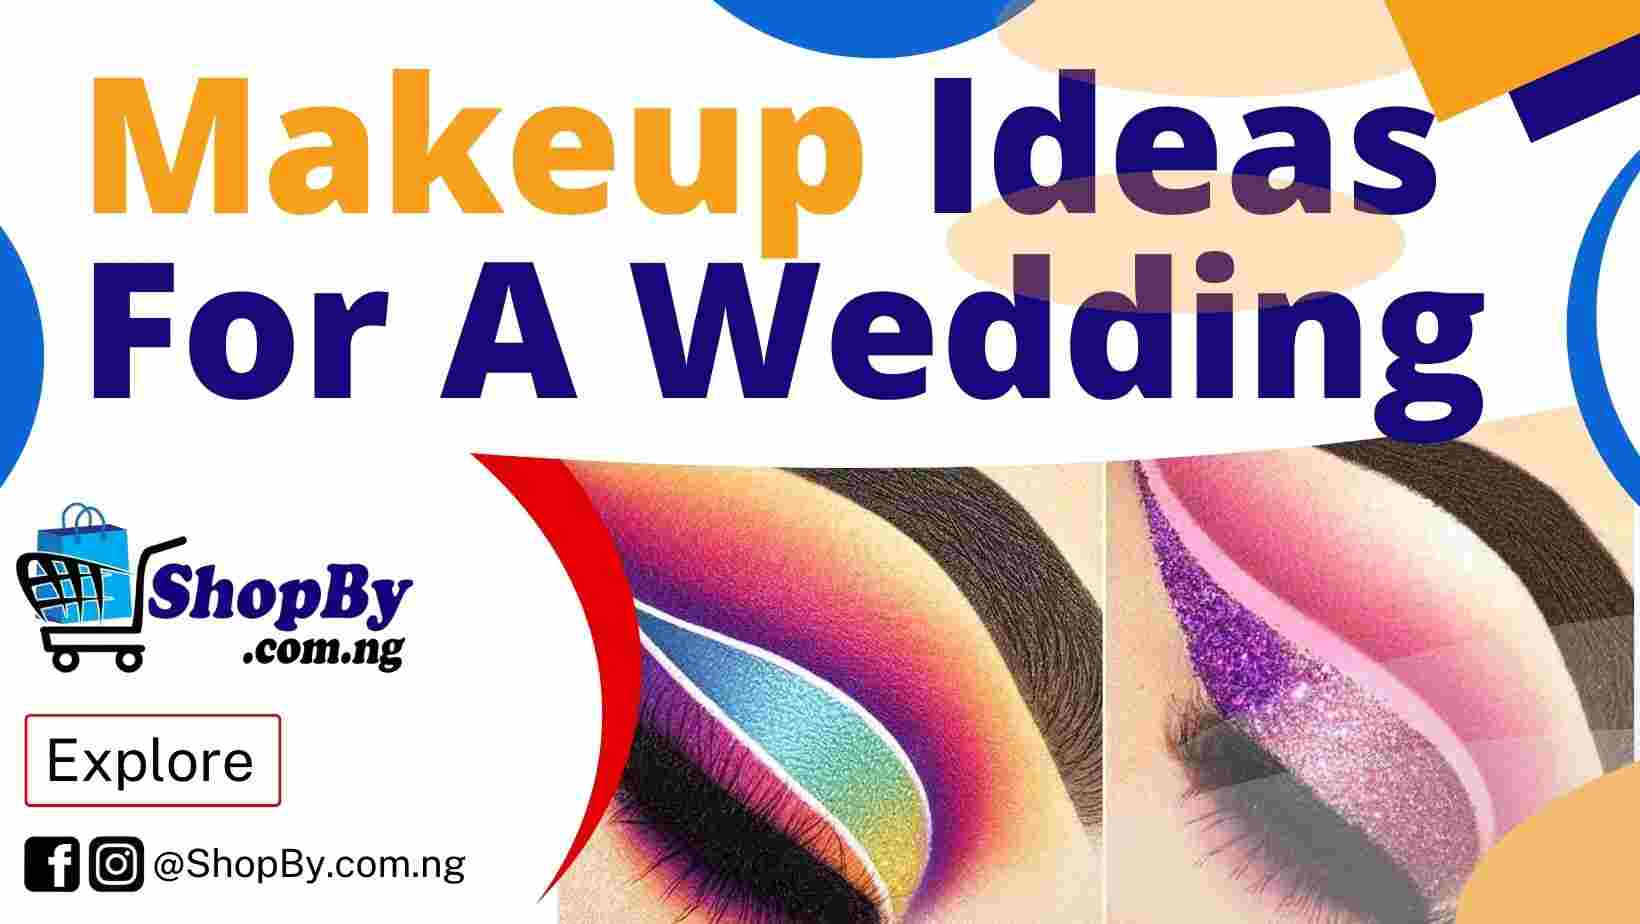 Makeup Ideas For A Wedding shopby online mall